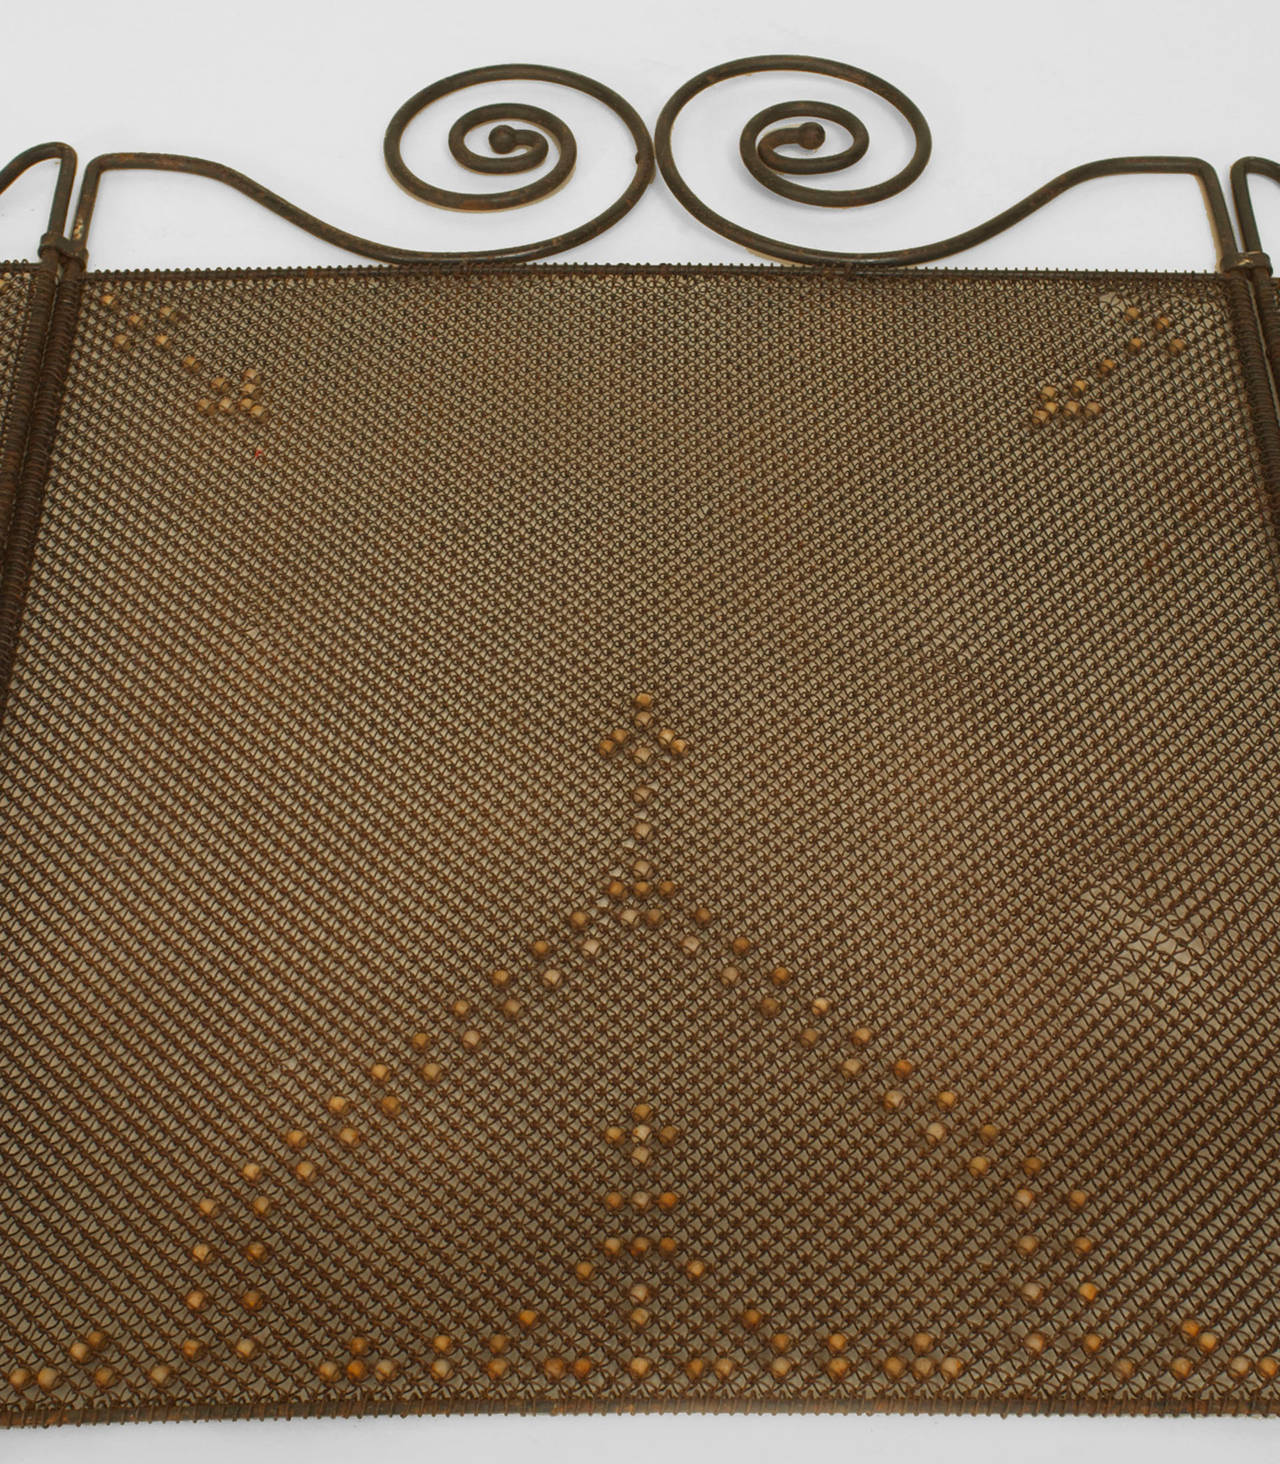 American Mission wrought iron low fire screen with a scrolling design top and
mess panels decorated with a beaded design.